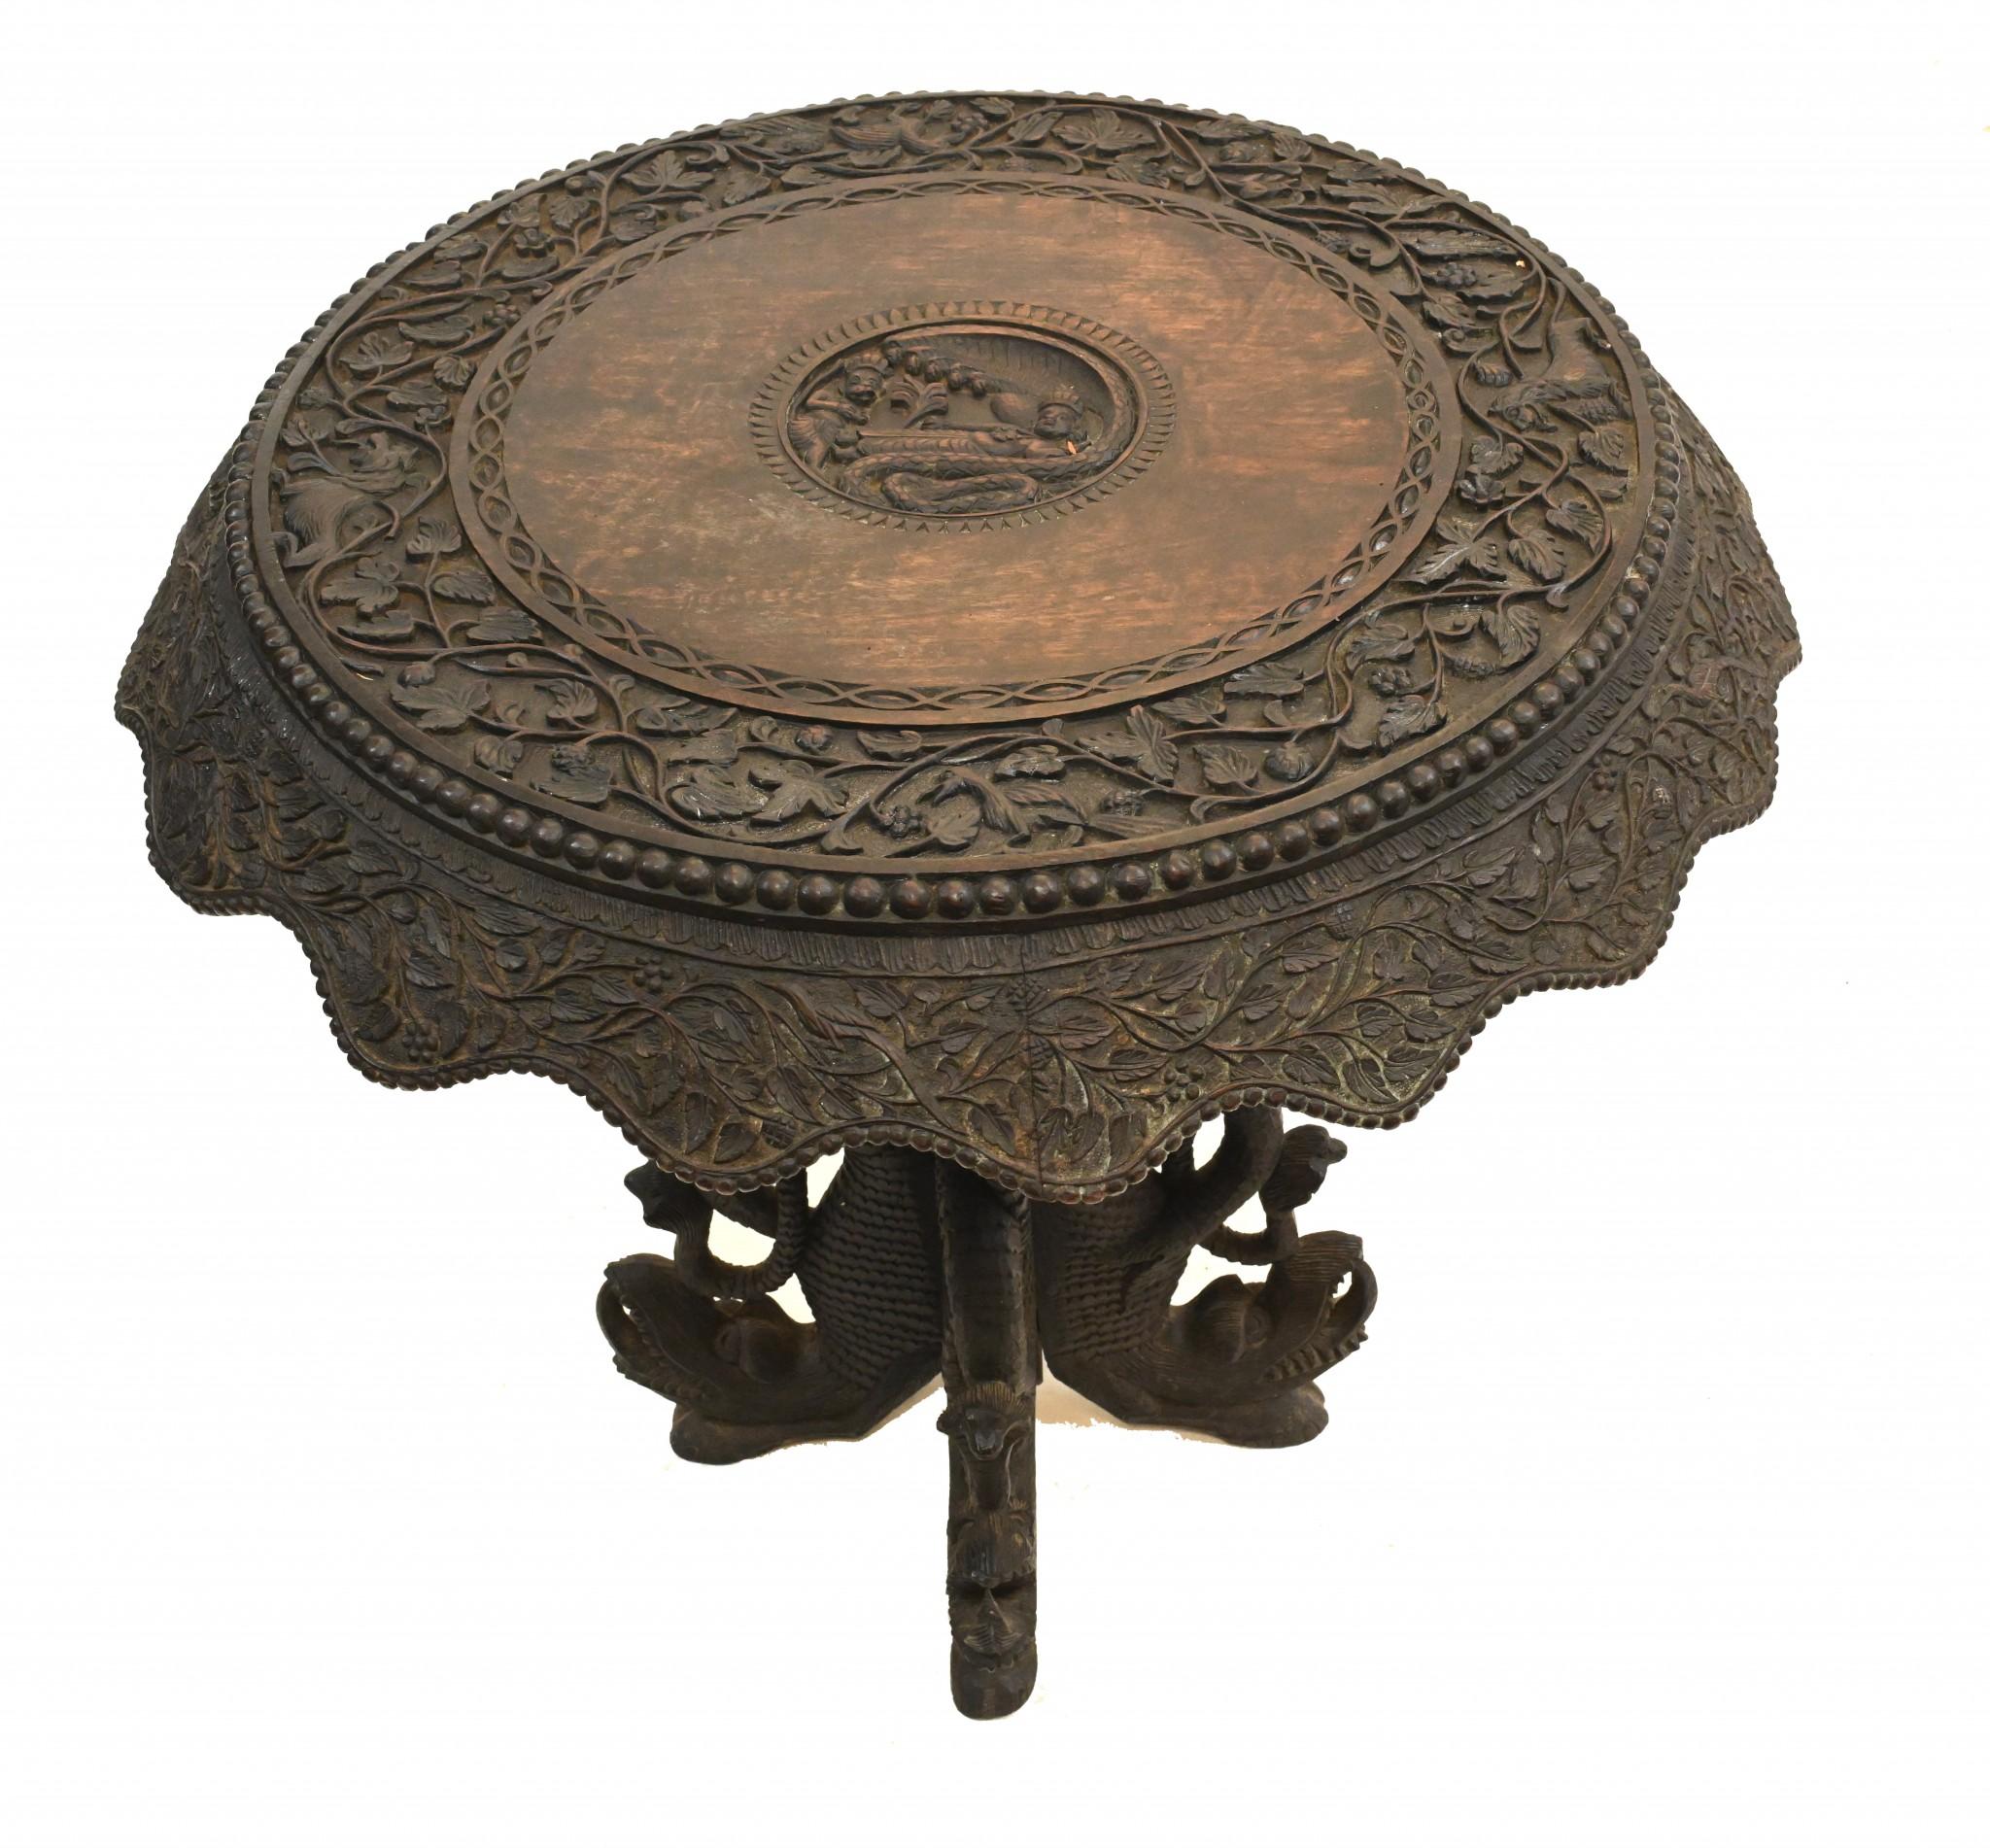 Eye catching Burmese antique side table
Very intricately carved, look at the alligator like creature on the legs
Such detailed craftsmanship on this table we date to circa 1890
Offered in great shape ready for home use right away
We ship to every